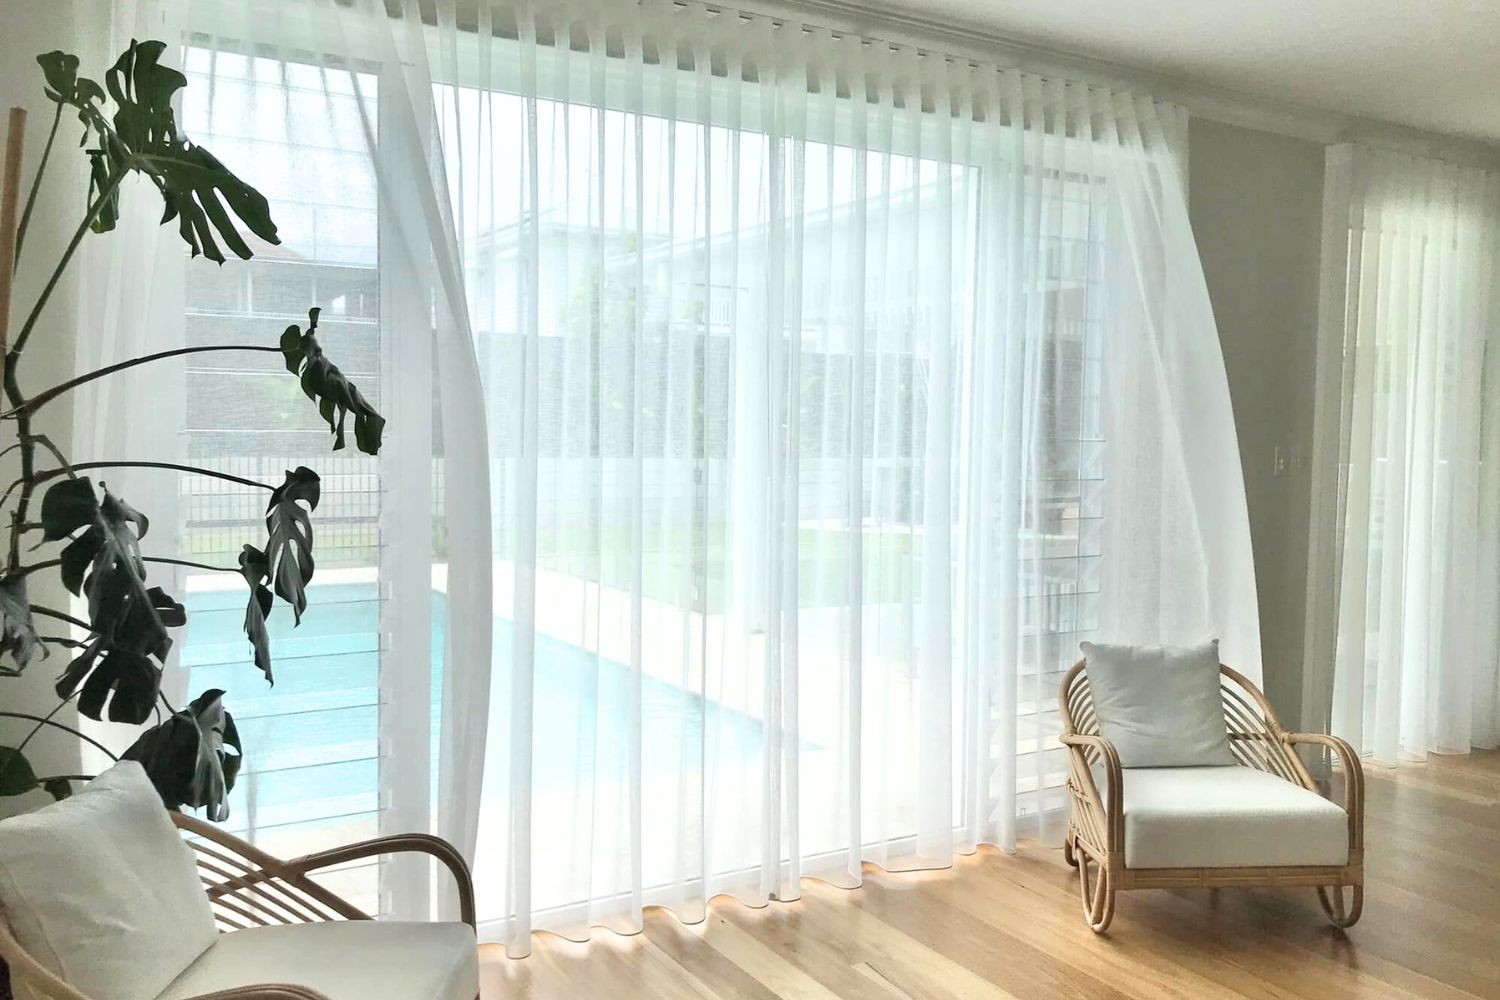 Flowing sheer curtains with view to sunnuy days and a pool outside